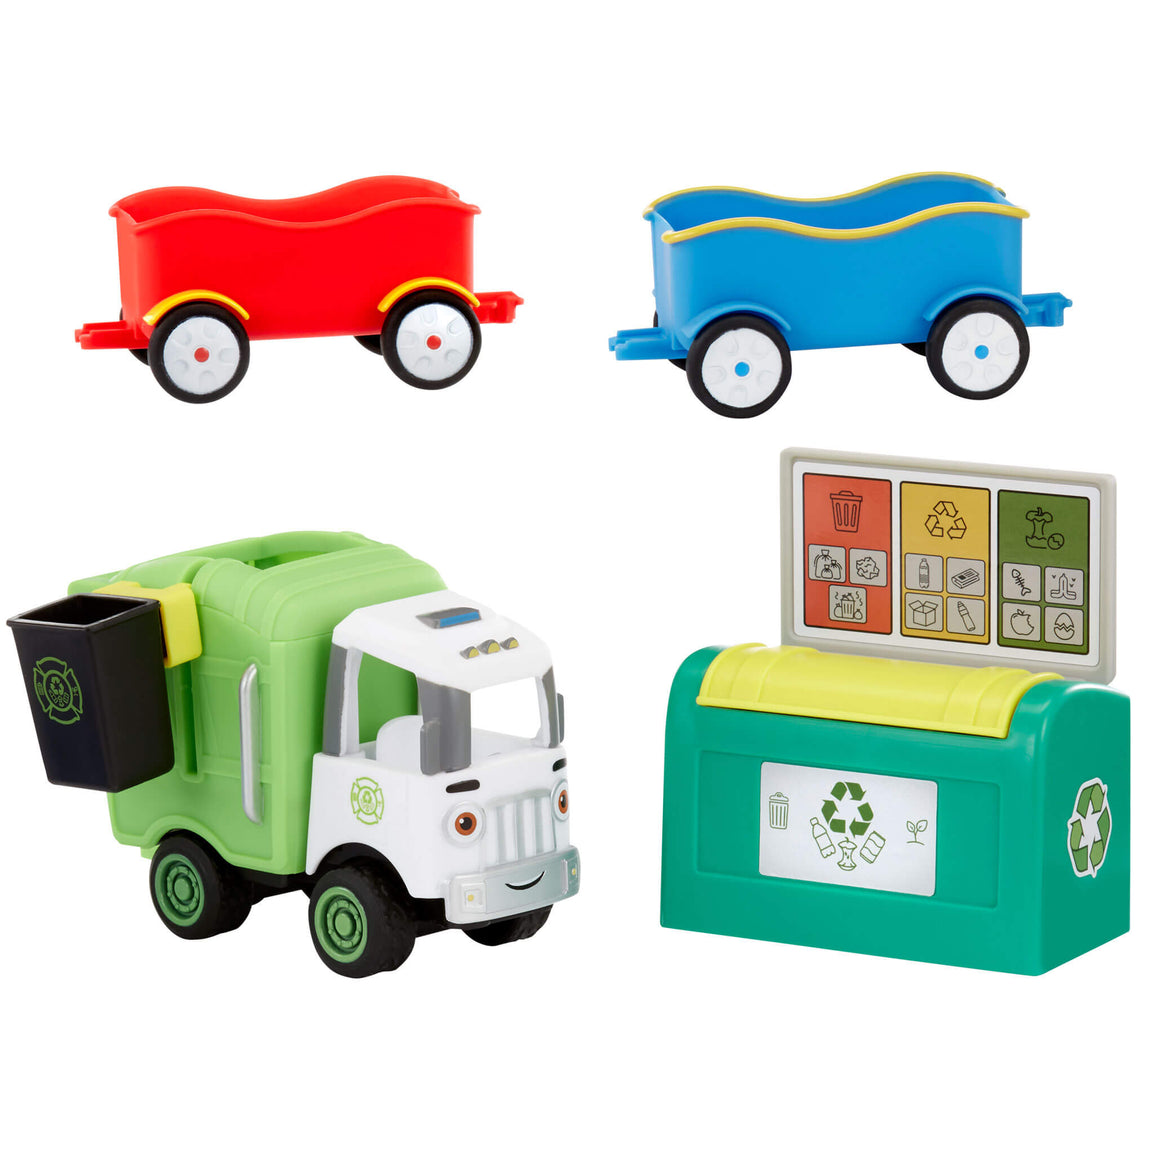 Let's Go Cozy Coupe™ Garbage Truck Playset - Official Little Tikes Website